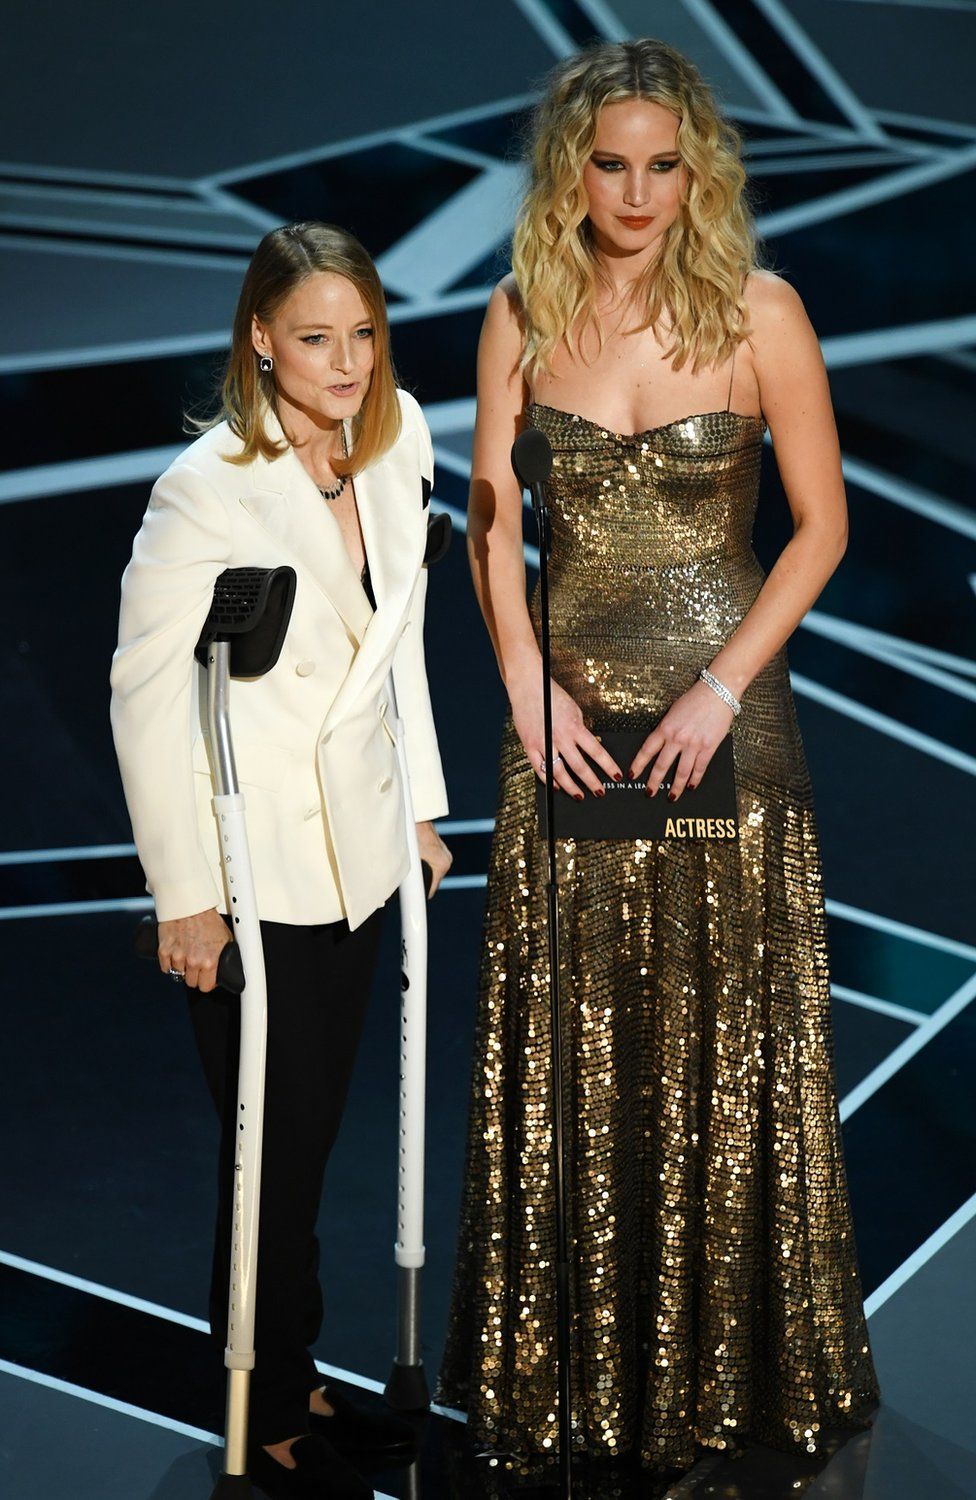 Jodie Foster with crutches and Jennifer Lawrence